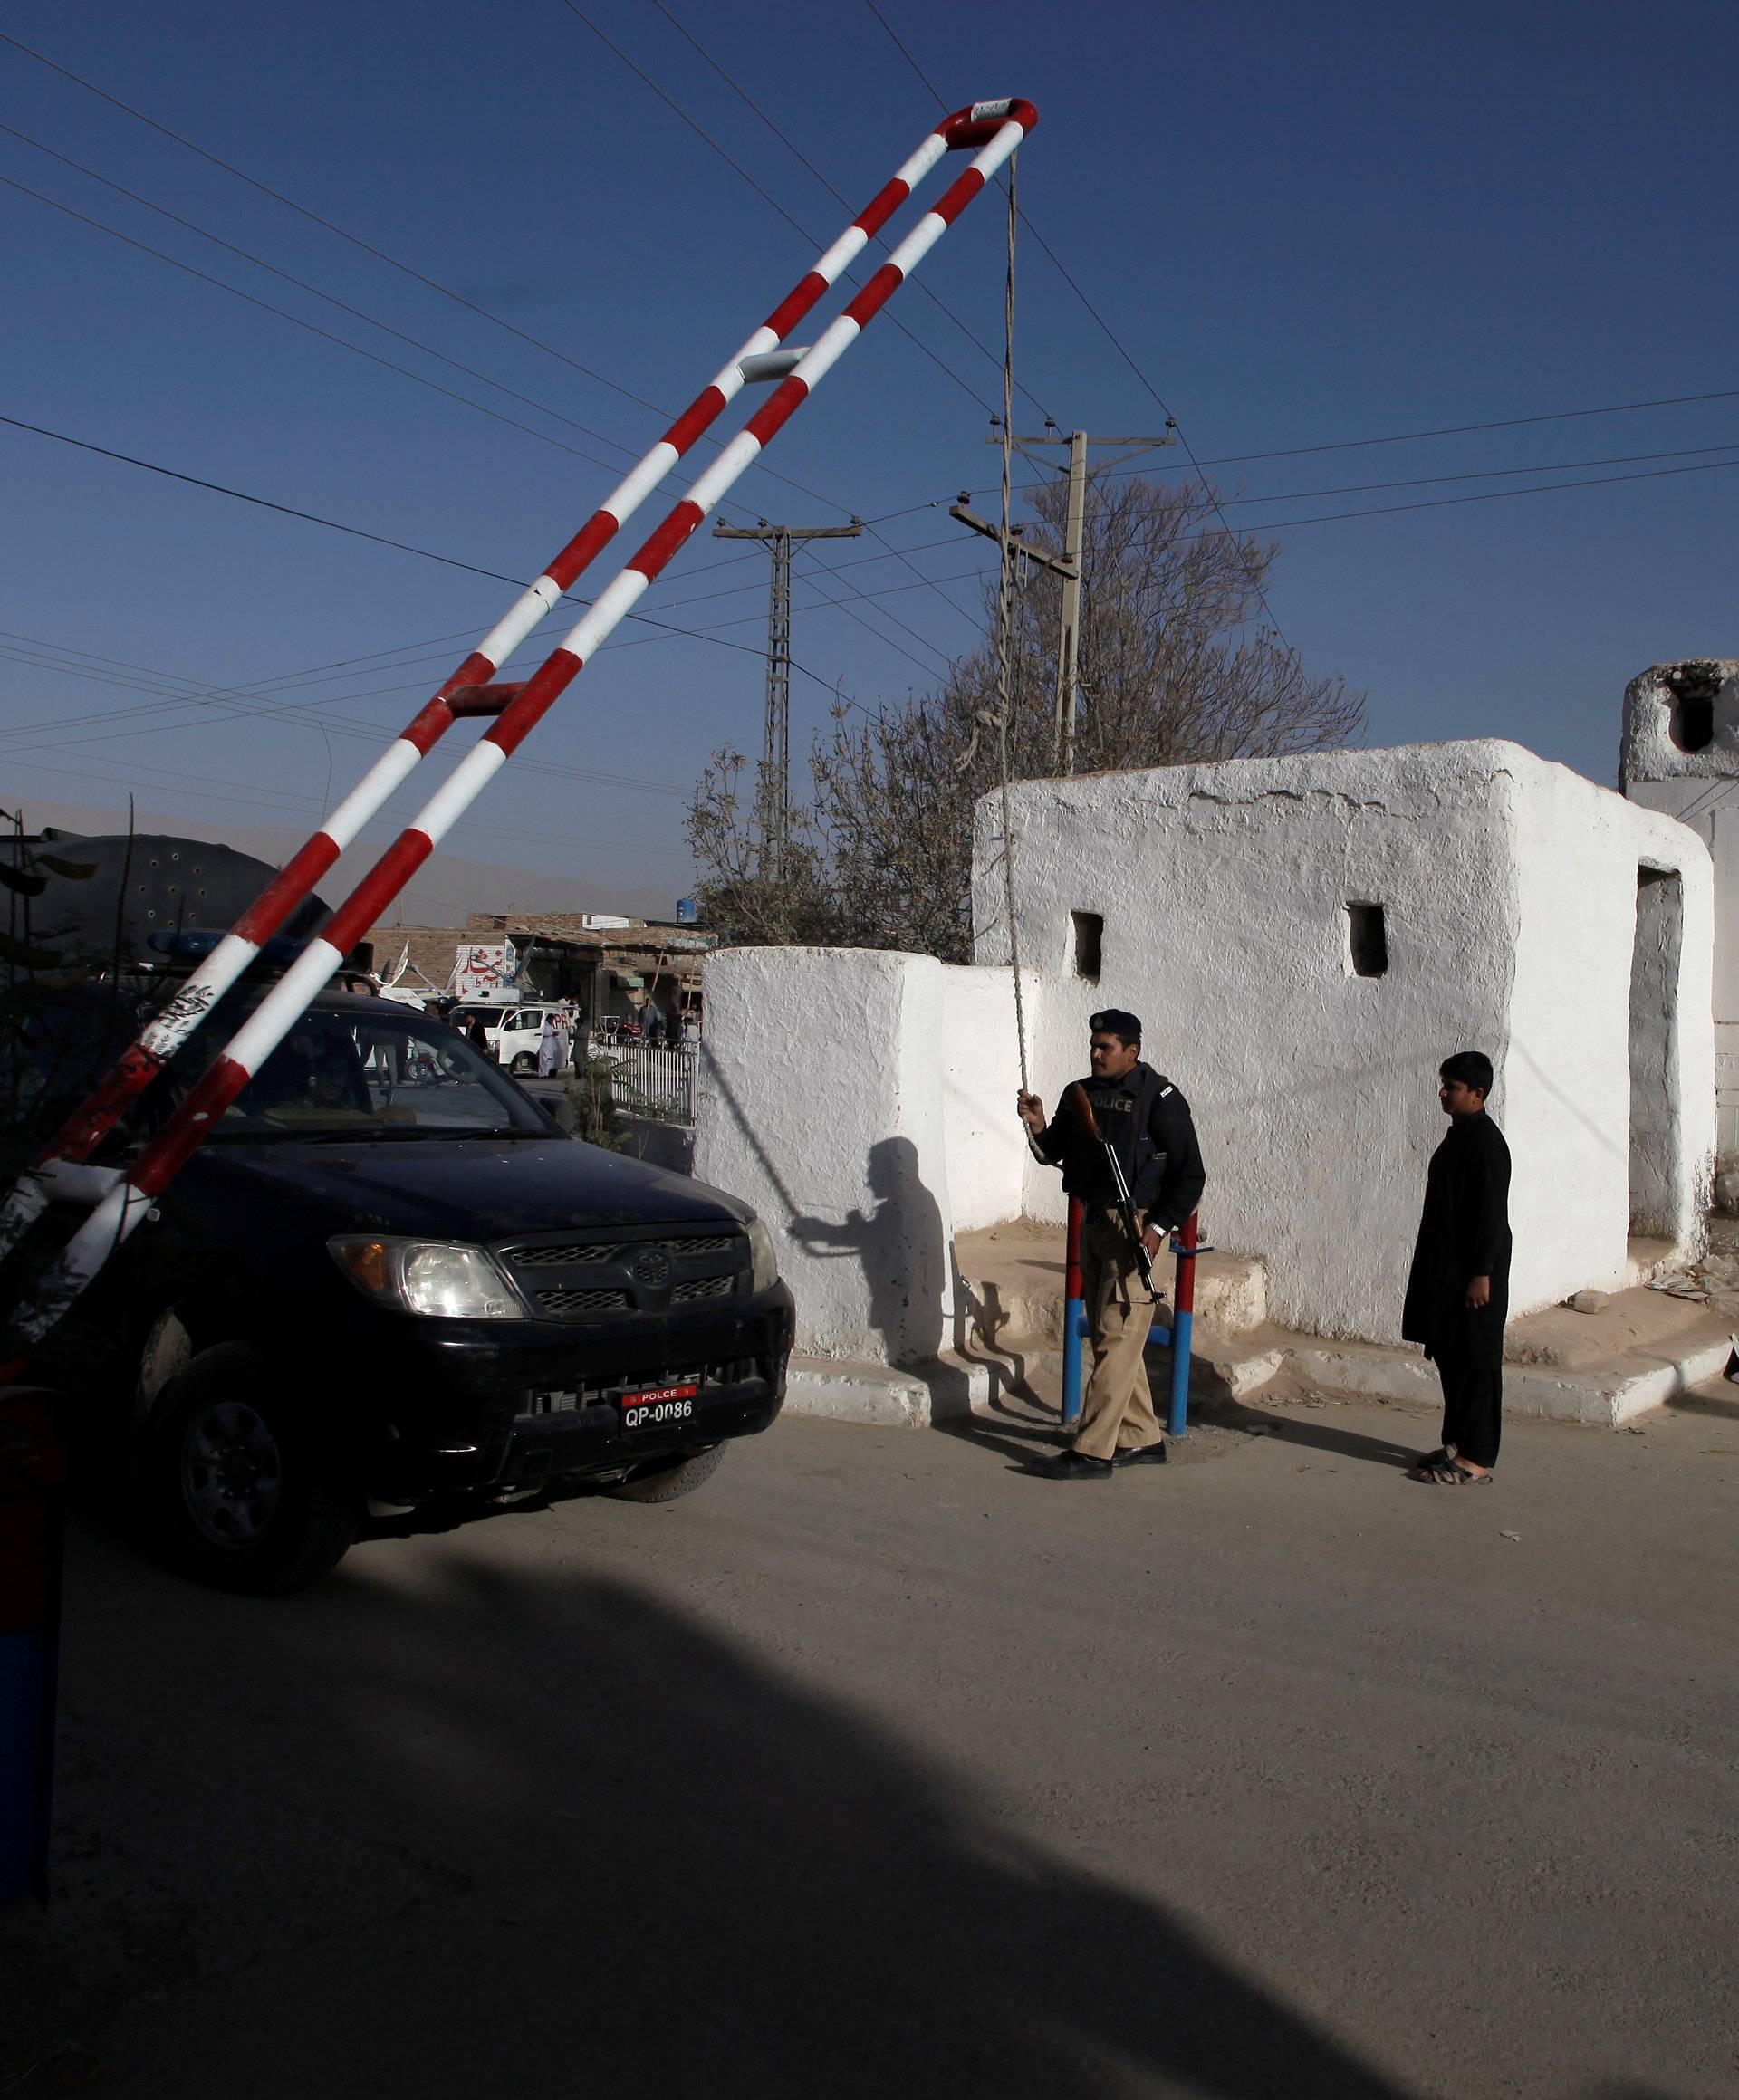 Barriers are raised to allow a police truck into the Police Training Center after an attack on the center in Quetta